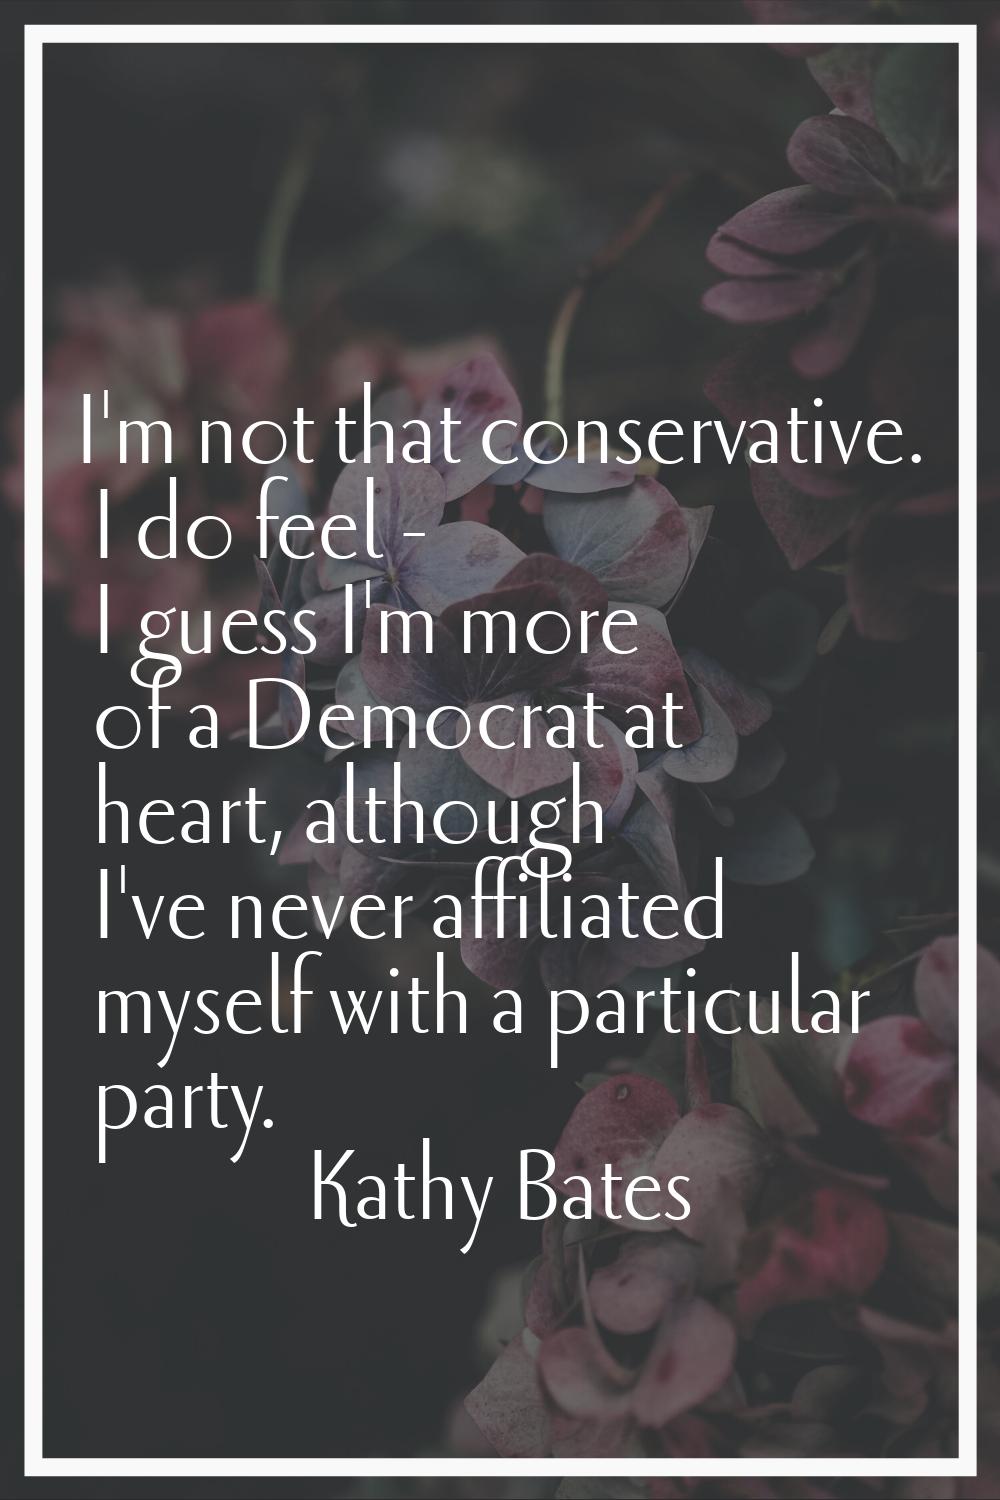 I'm not that conservative. I do feel - I guess I'm more of a Democrat at heart, although I've never